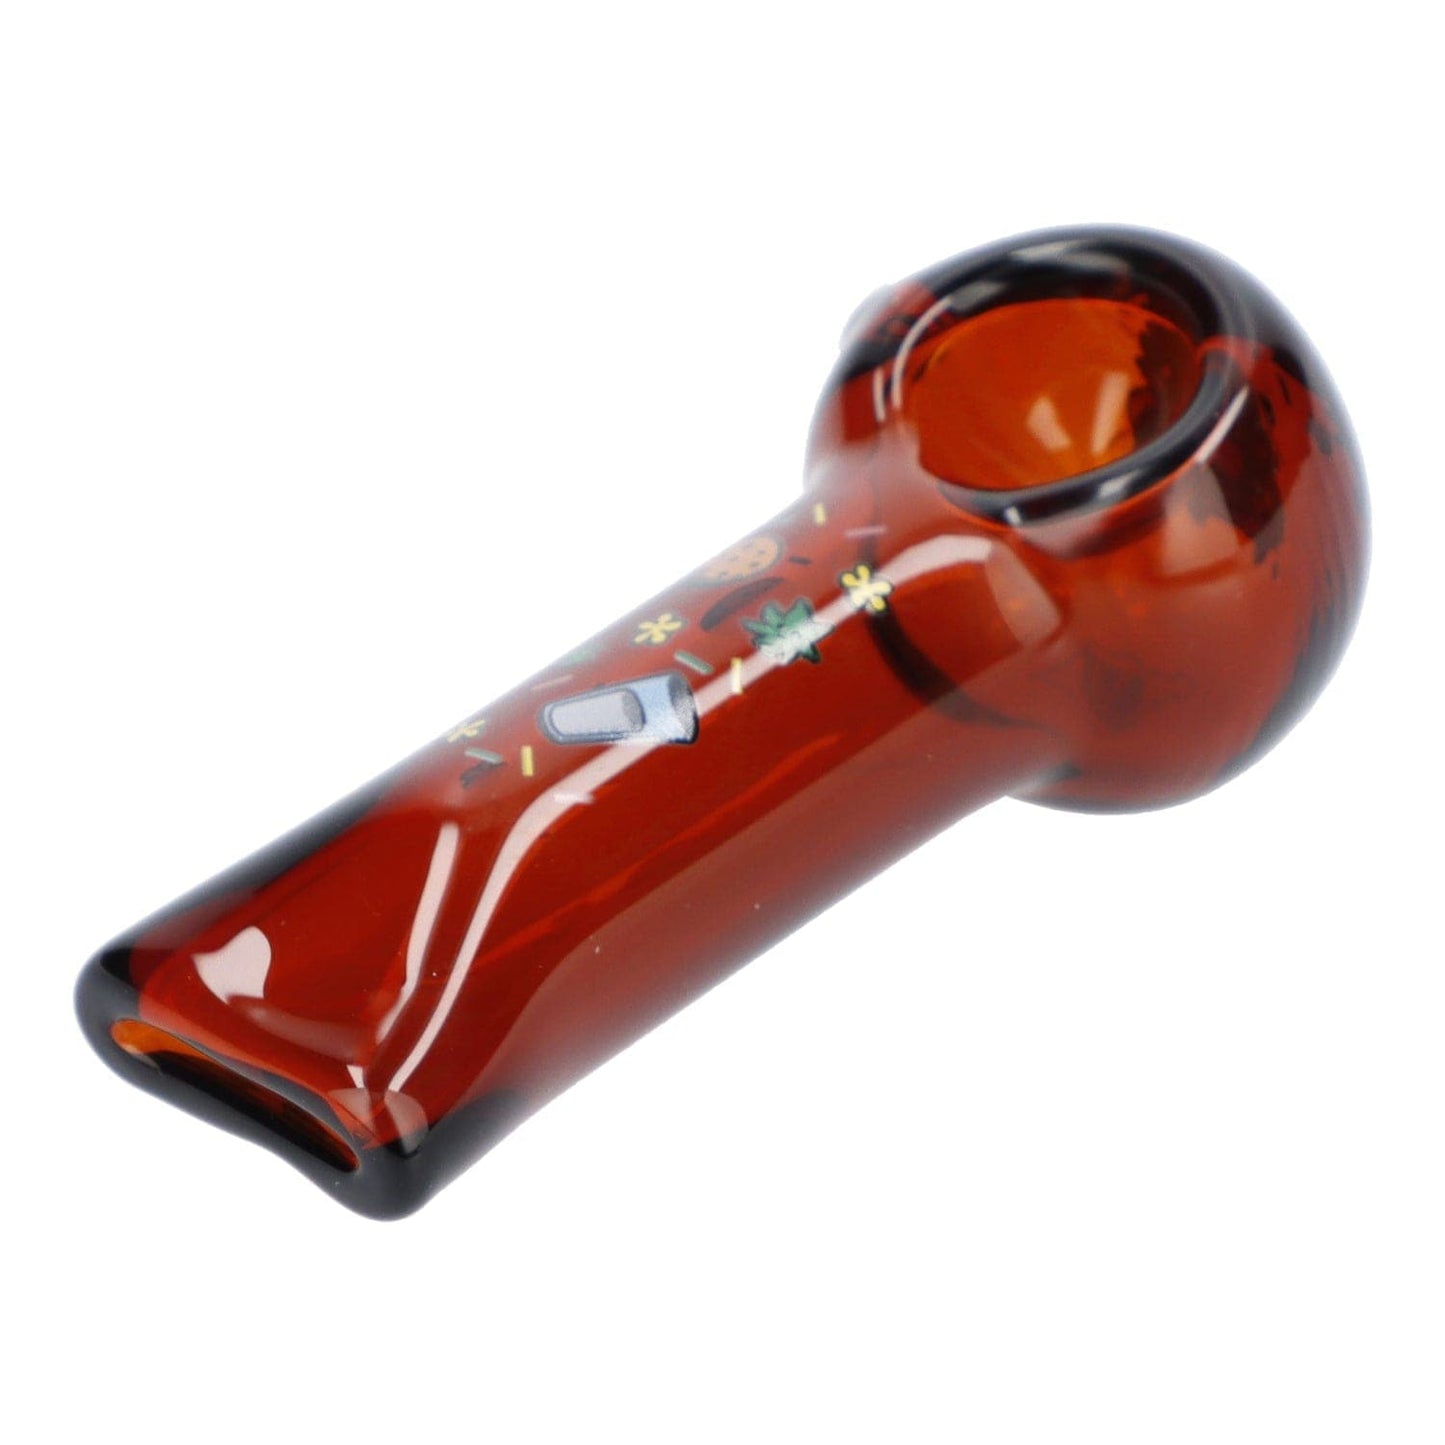 Wido Hand Pipe 4" GSC Hand Pipe - Transparent Amber